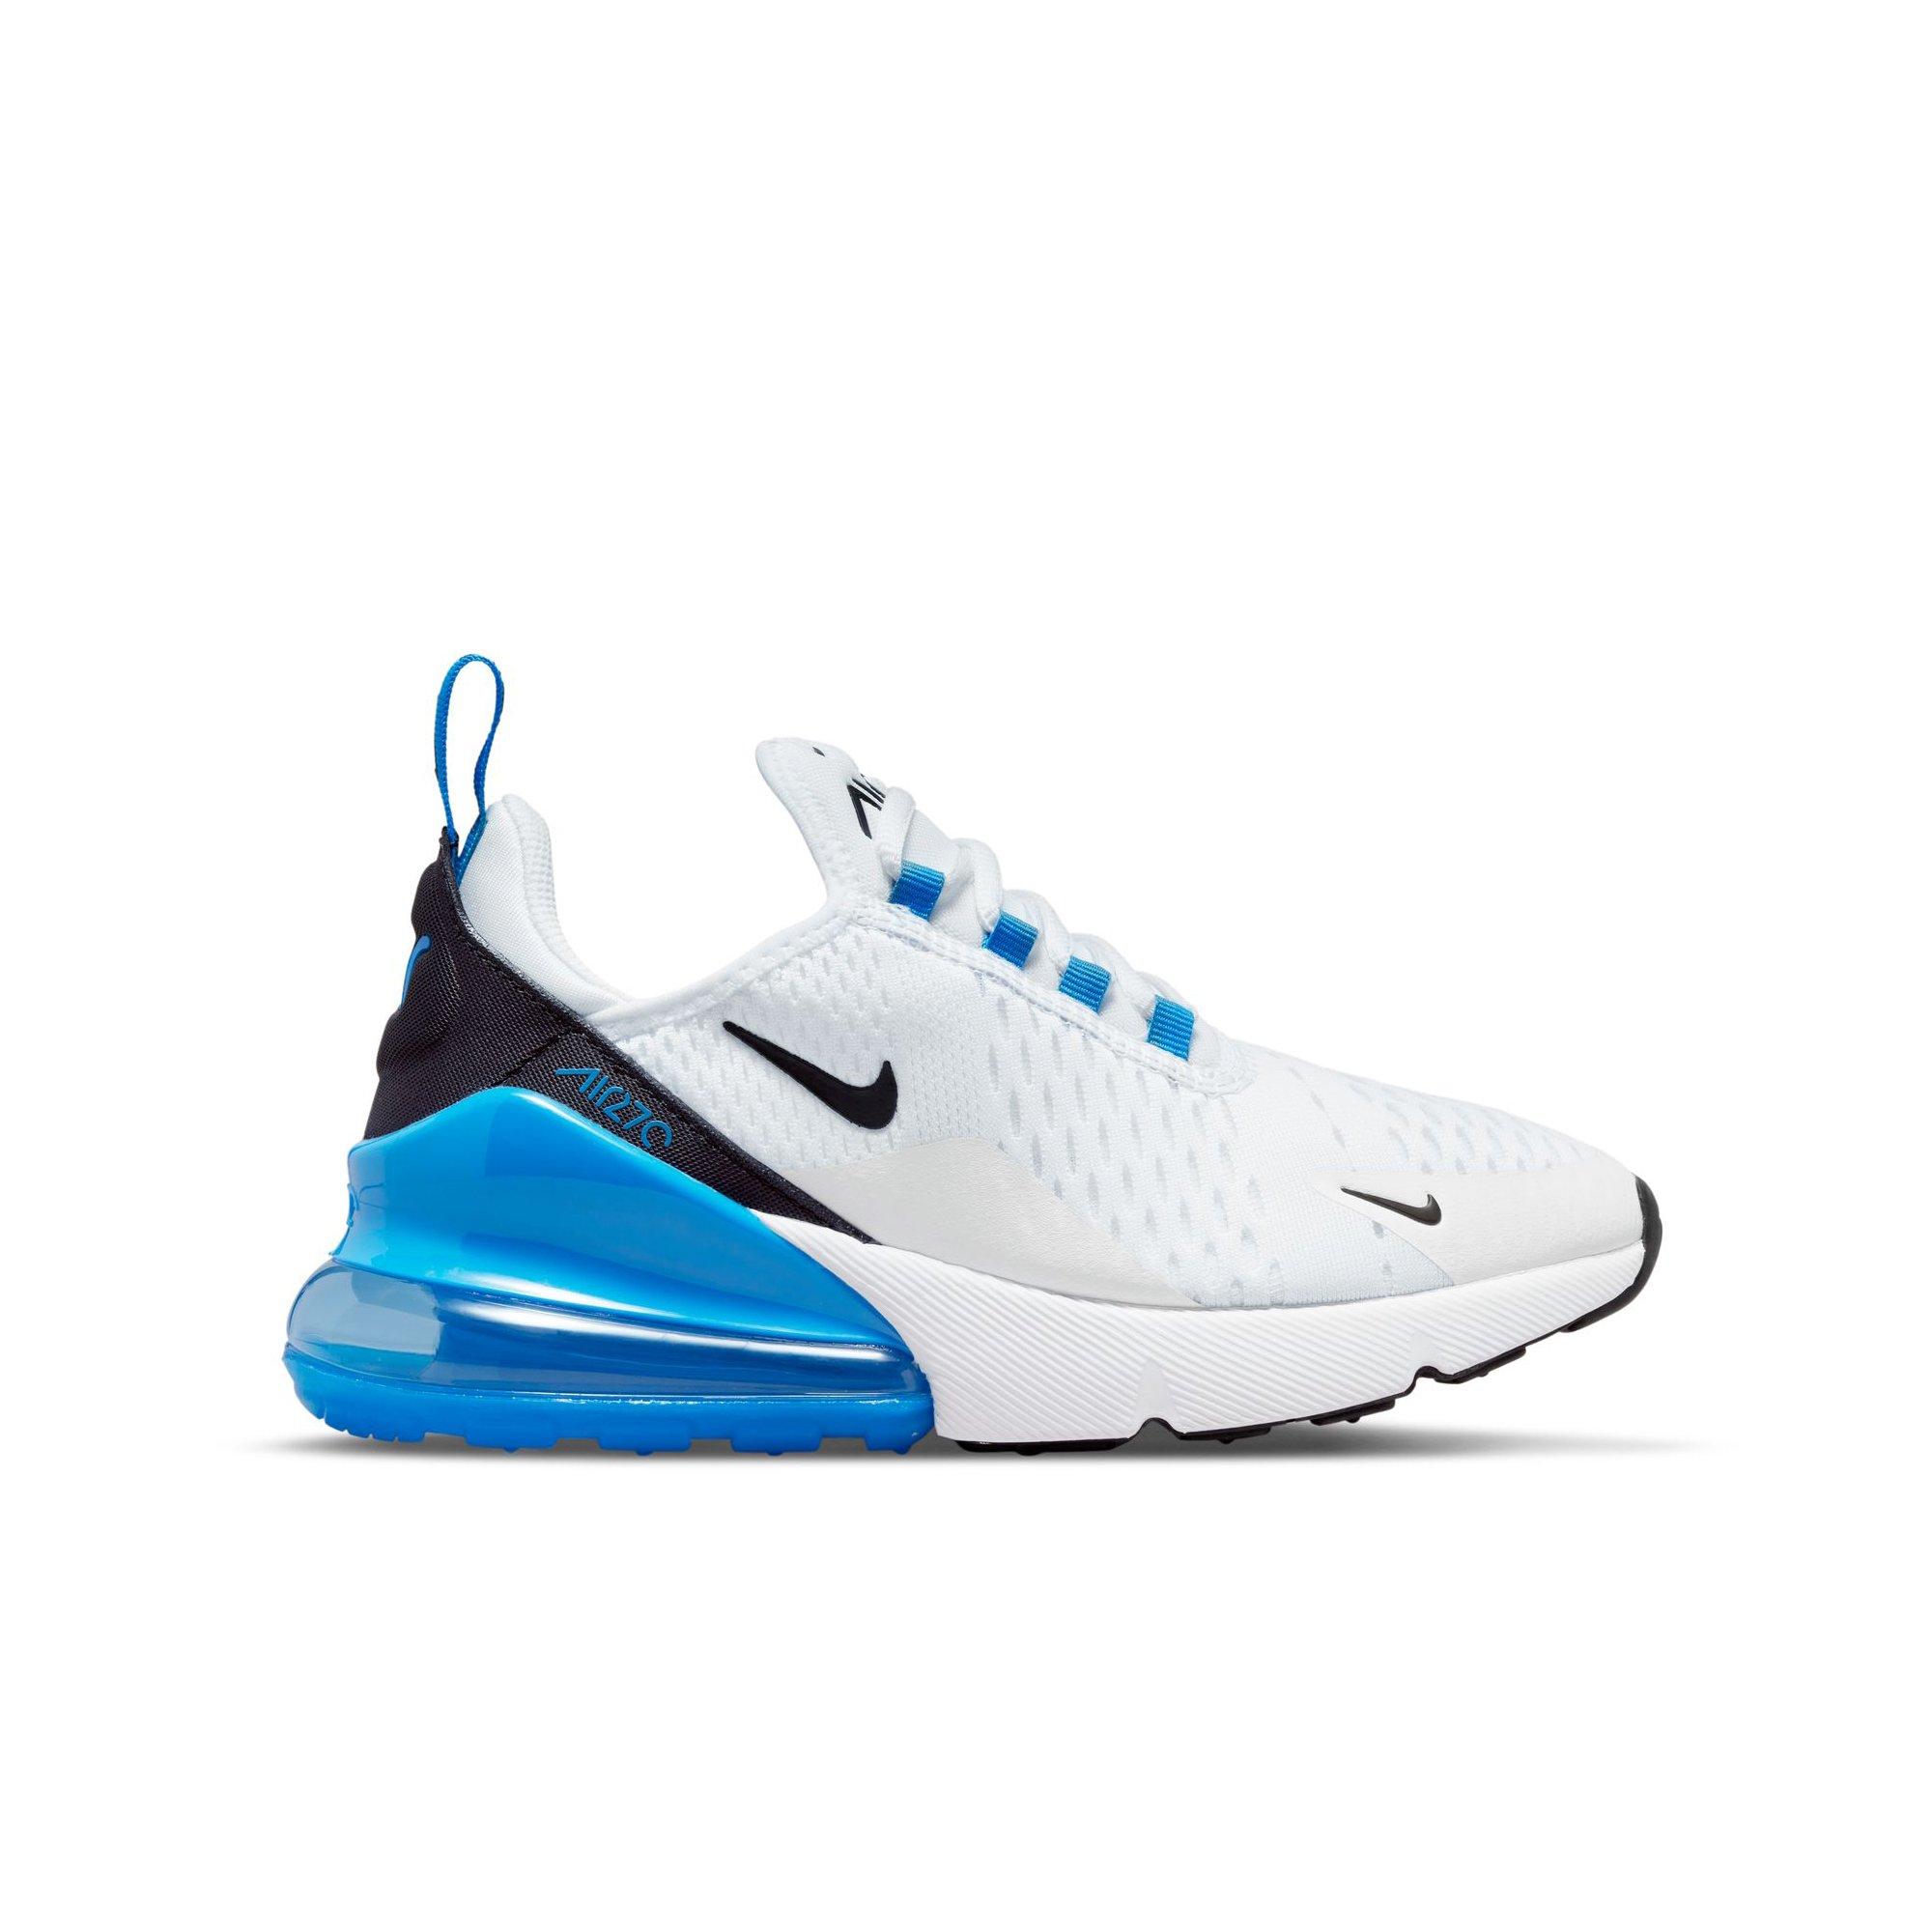 nike air max 270 sneakers in black and blue